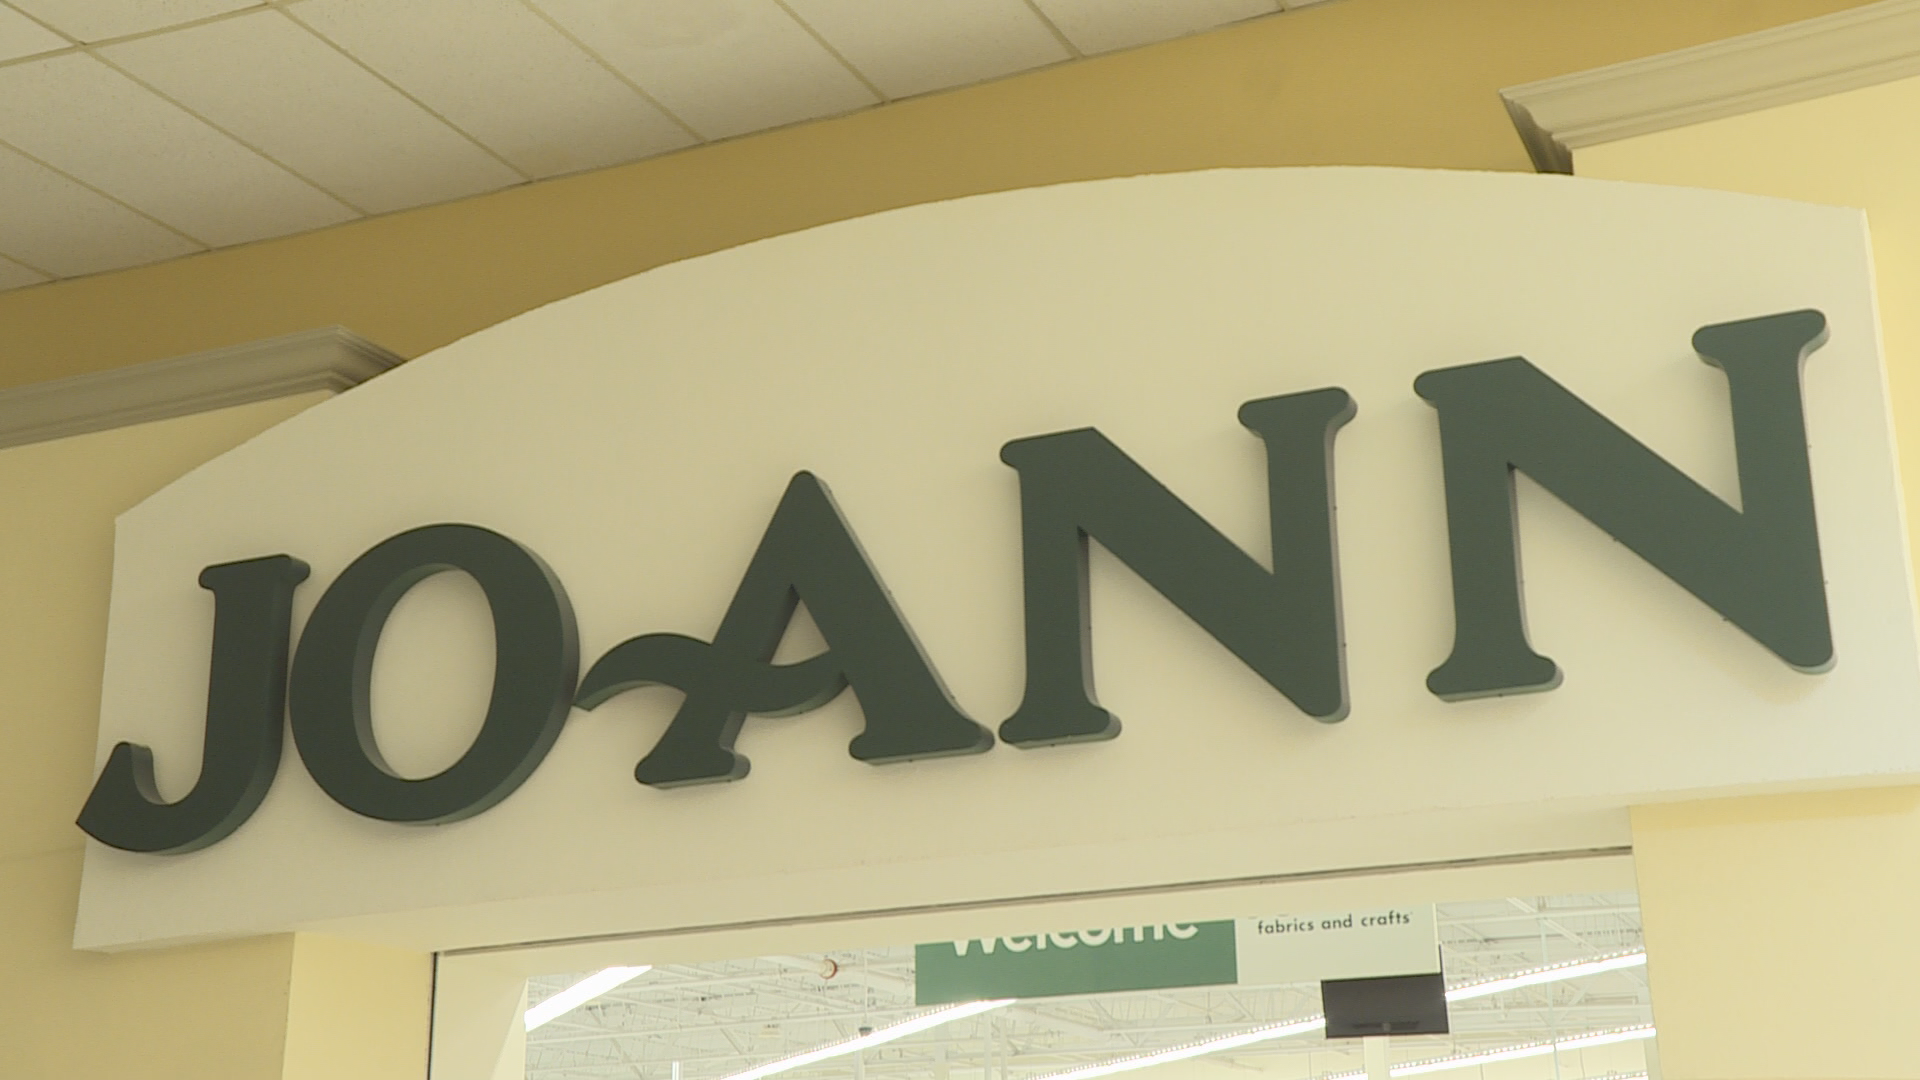 Joann employees, supporters voice concern